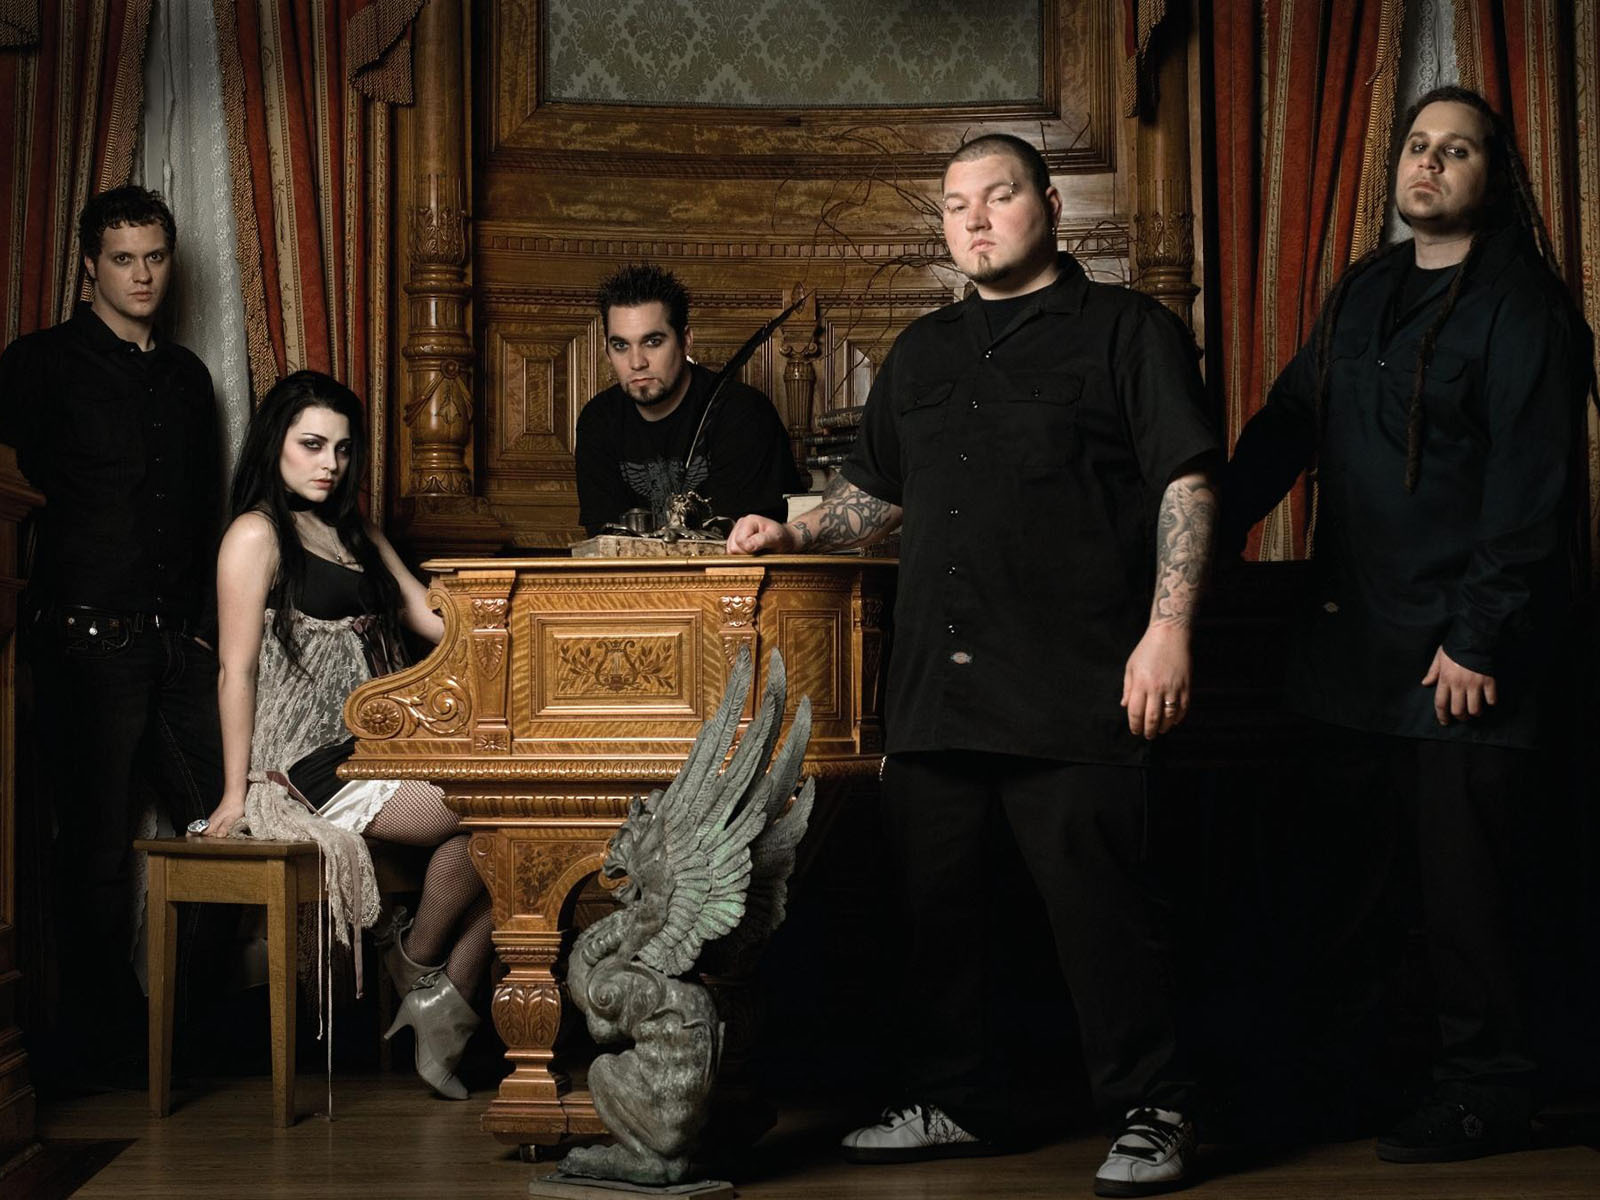 http://images1.fanpop.com/images/photos/2300000/Evanescence-evanescence-2392749-1600-1200.jpg